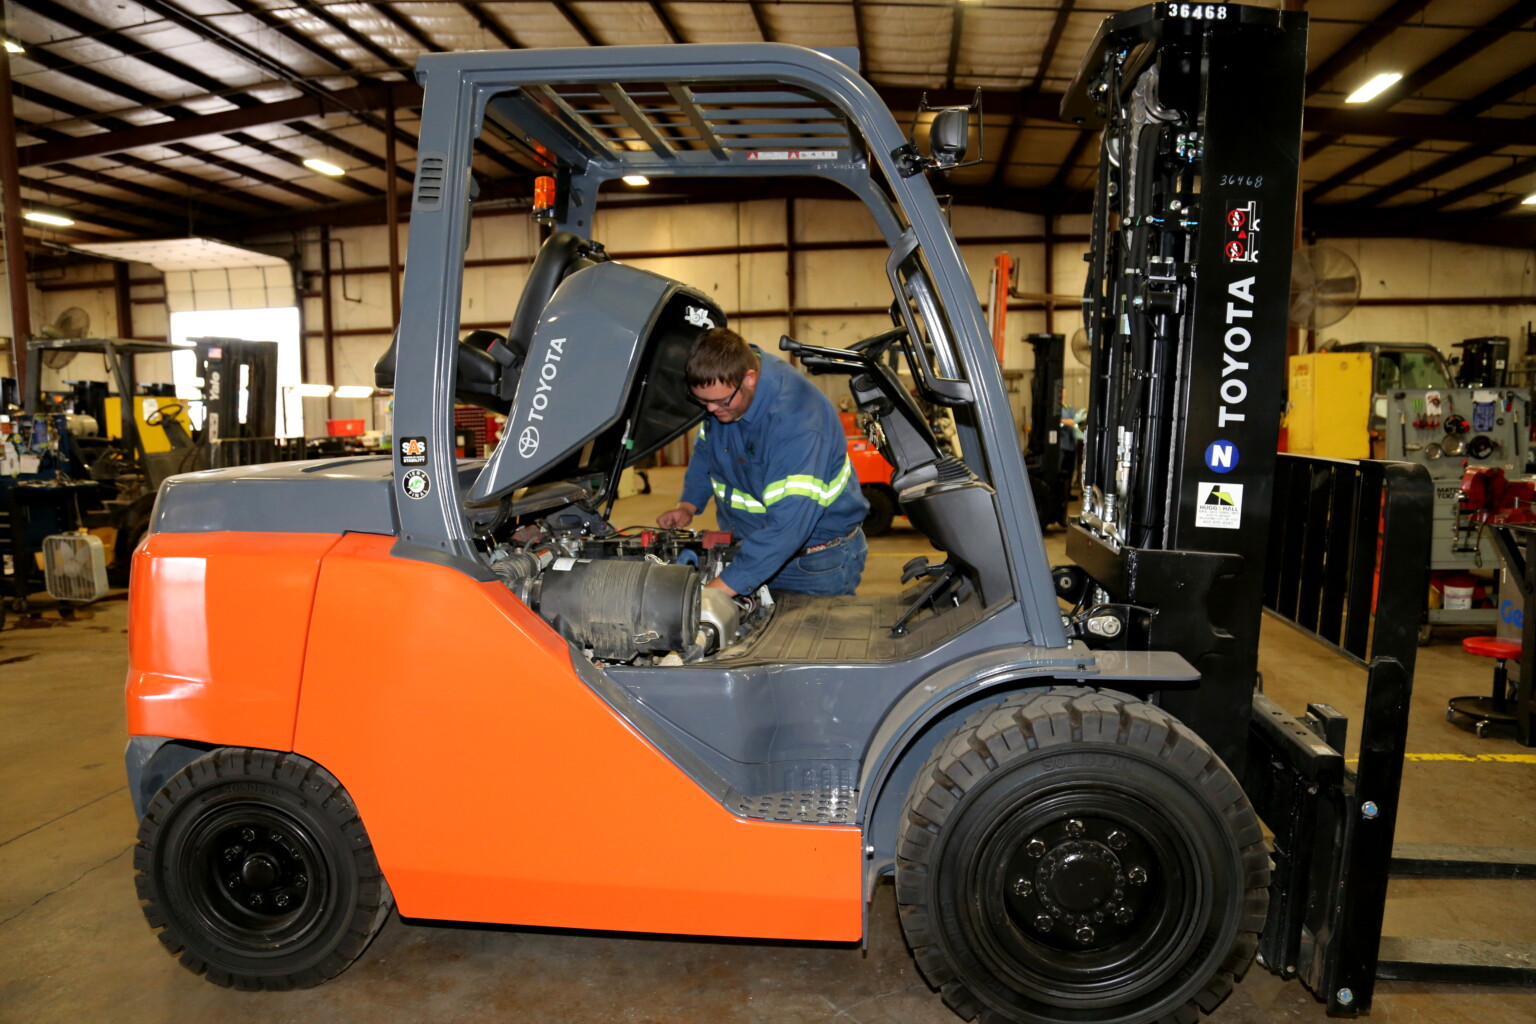 A technician in a blue uniform performs maintenance on an orange Toyota forklift. Article: How to Dispose of Used Oil.